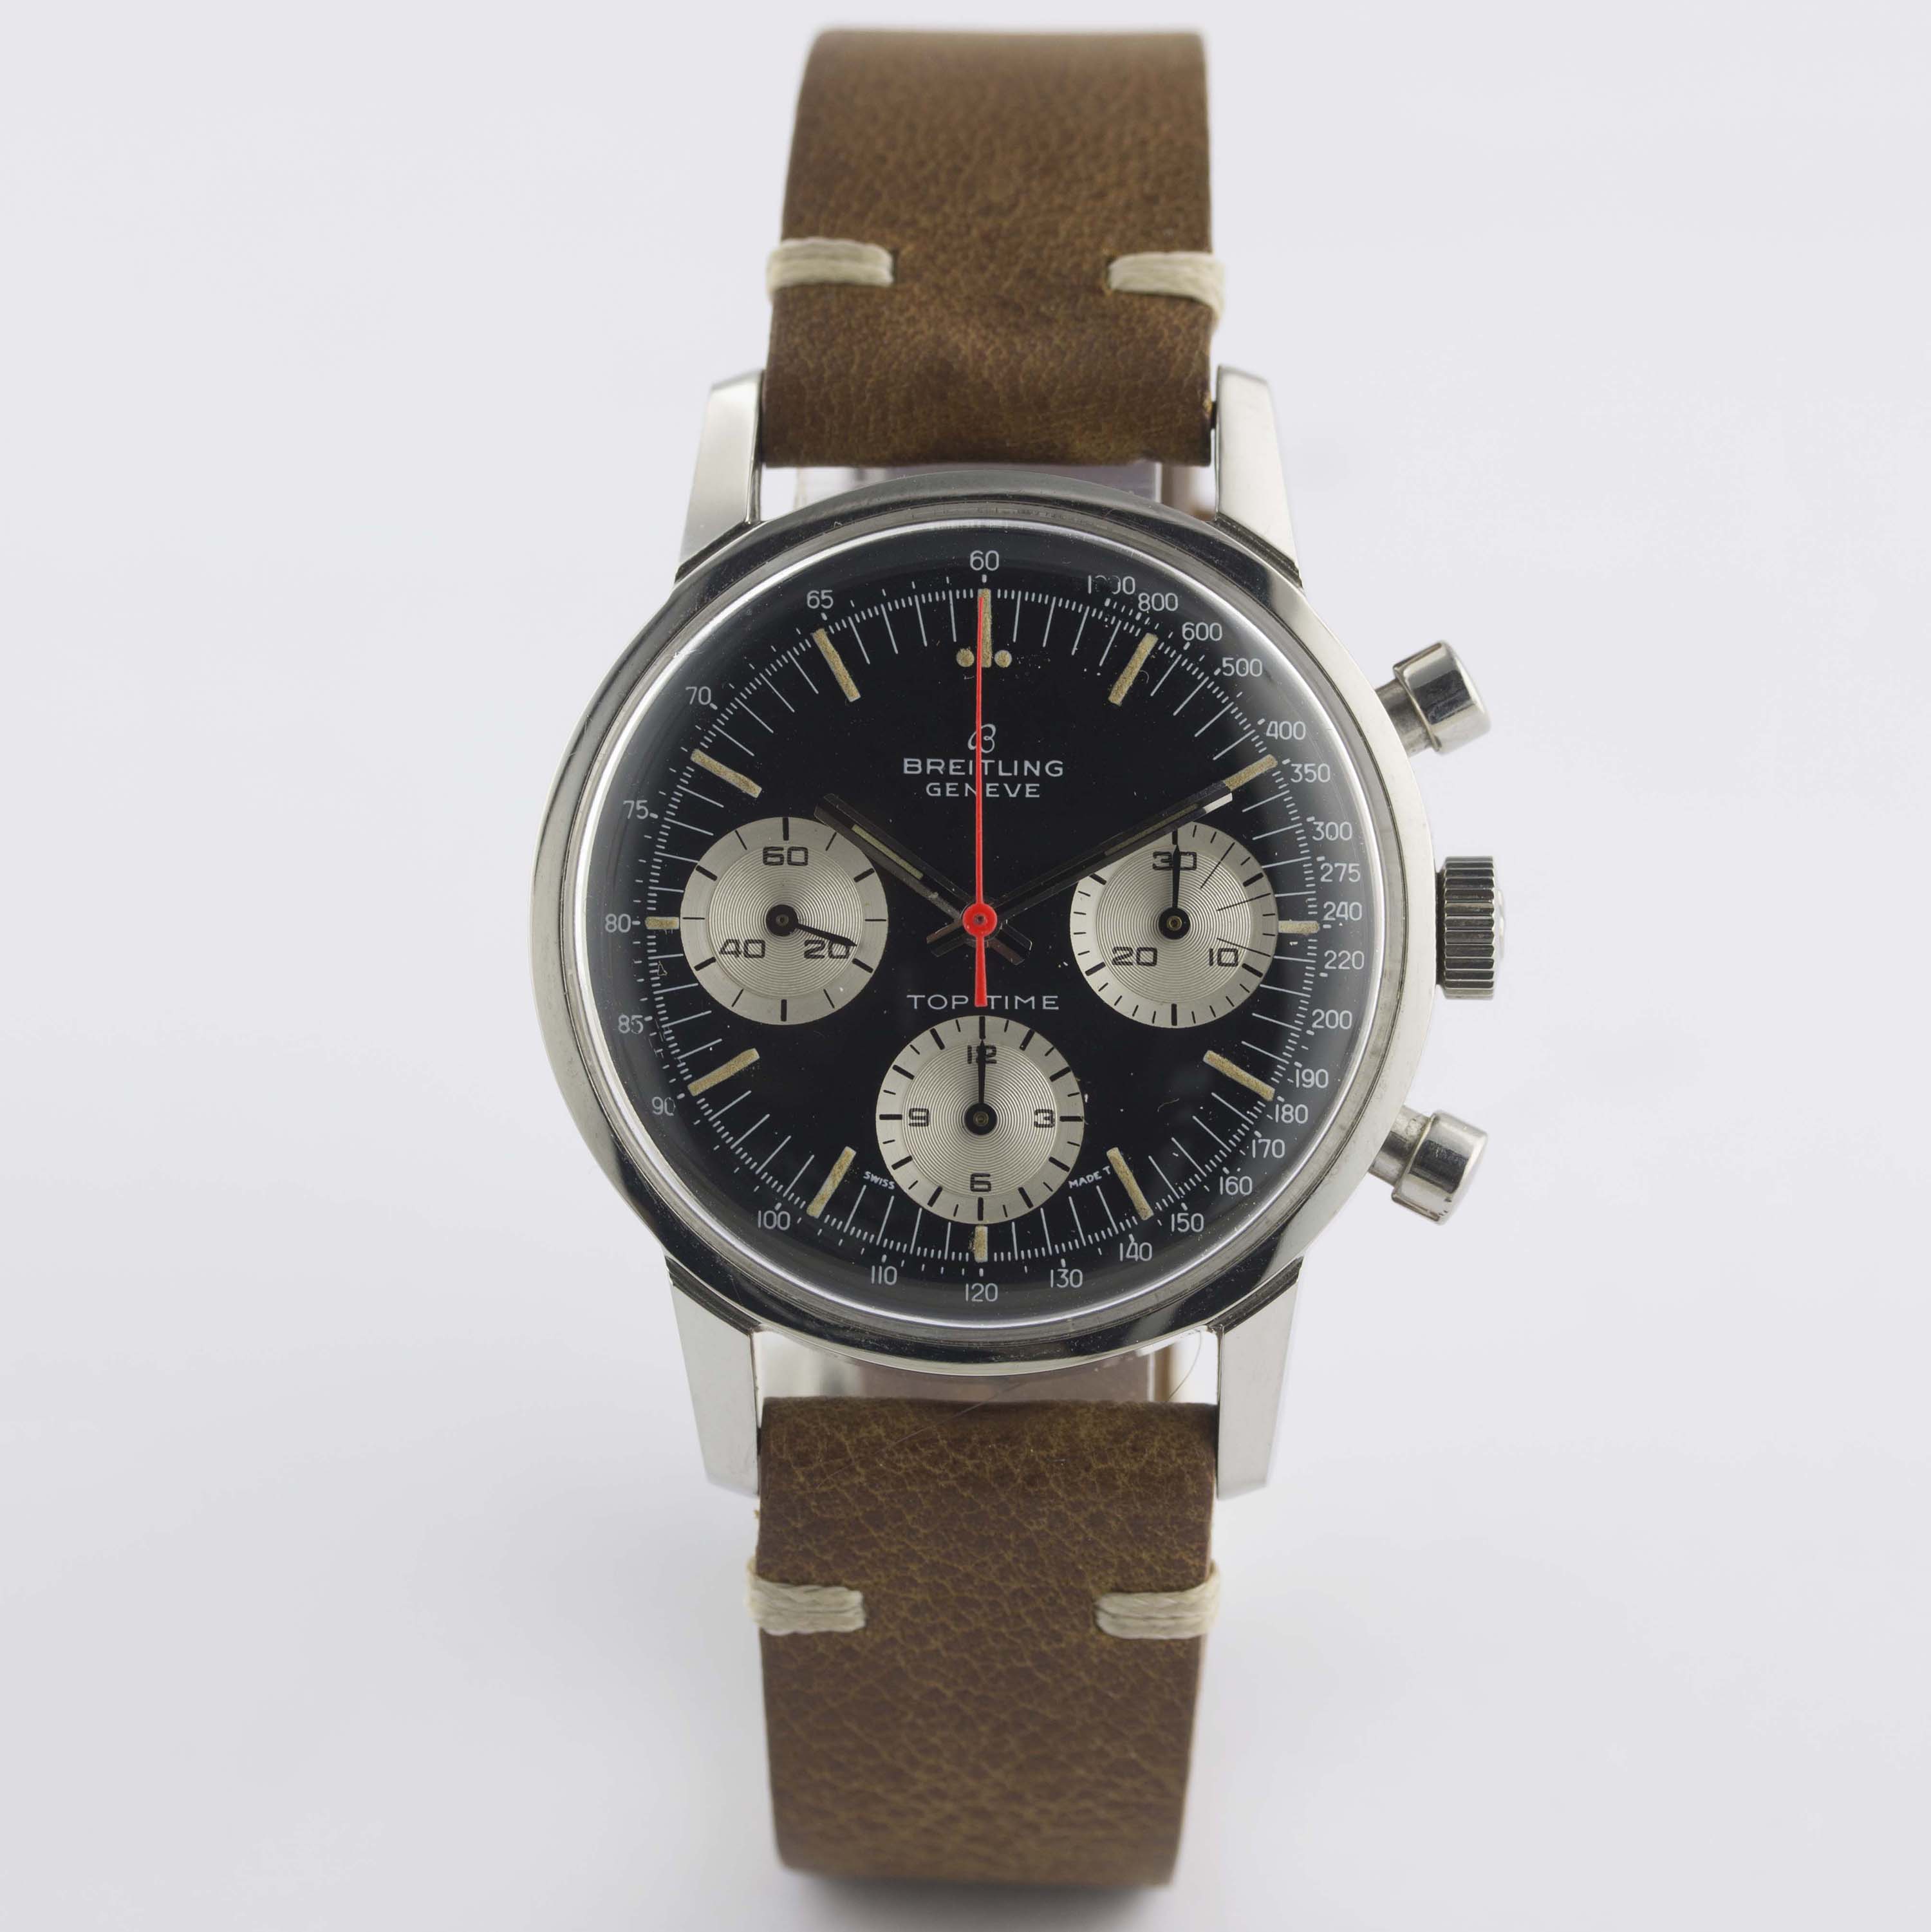 A RARE GENTLEMAN'S STAINLESS STEEL BREITLING TOP TIME CHRONOGRAPH WRIST WATCH CIRCA 1969, REF. 810 - Image 3 of 11